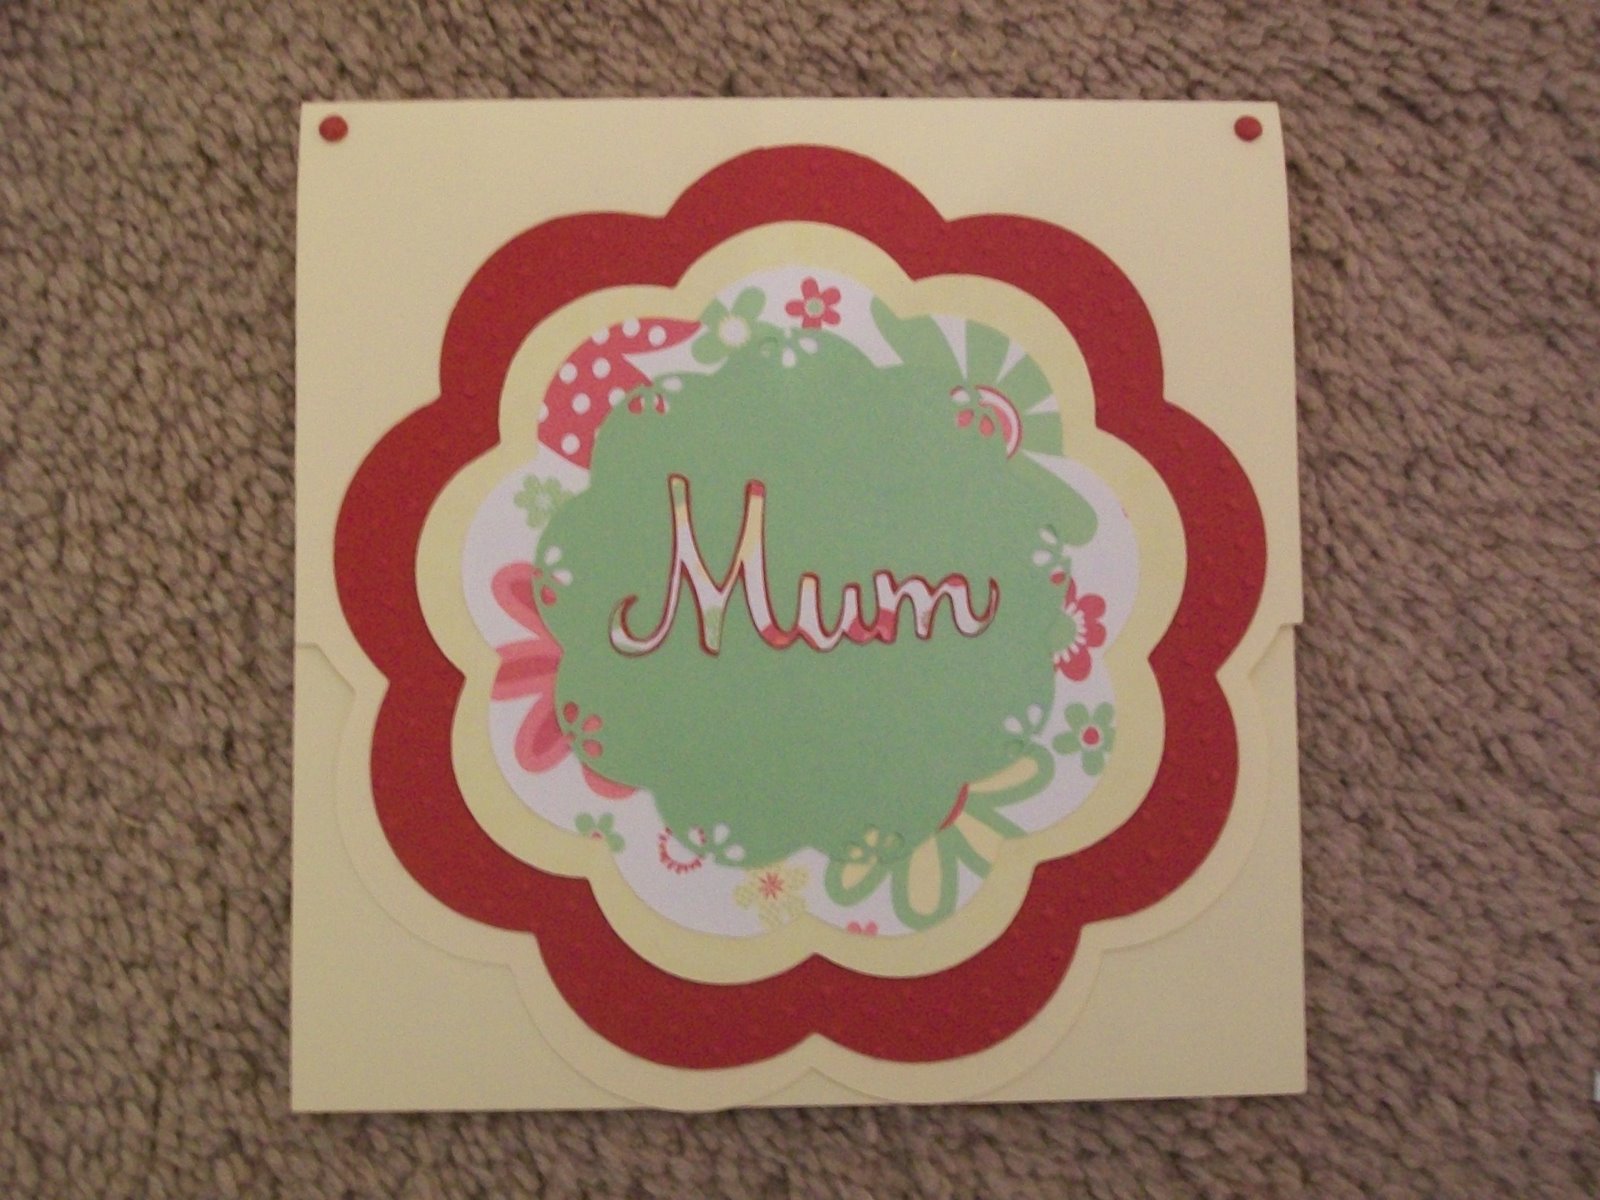 [MIL+mother's+day+card.JPG]